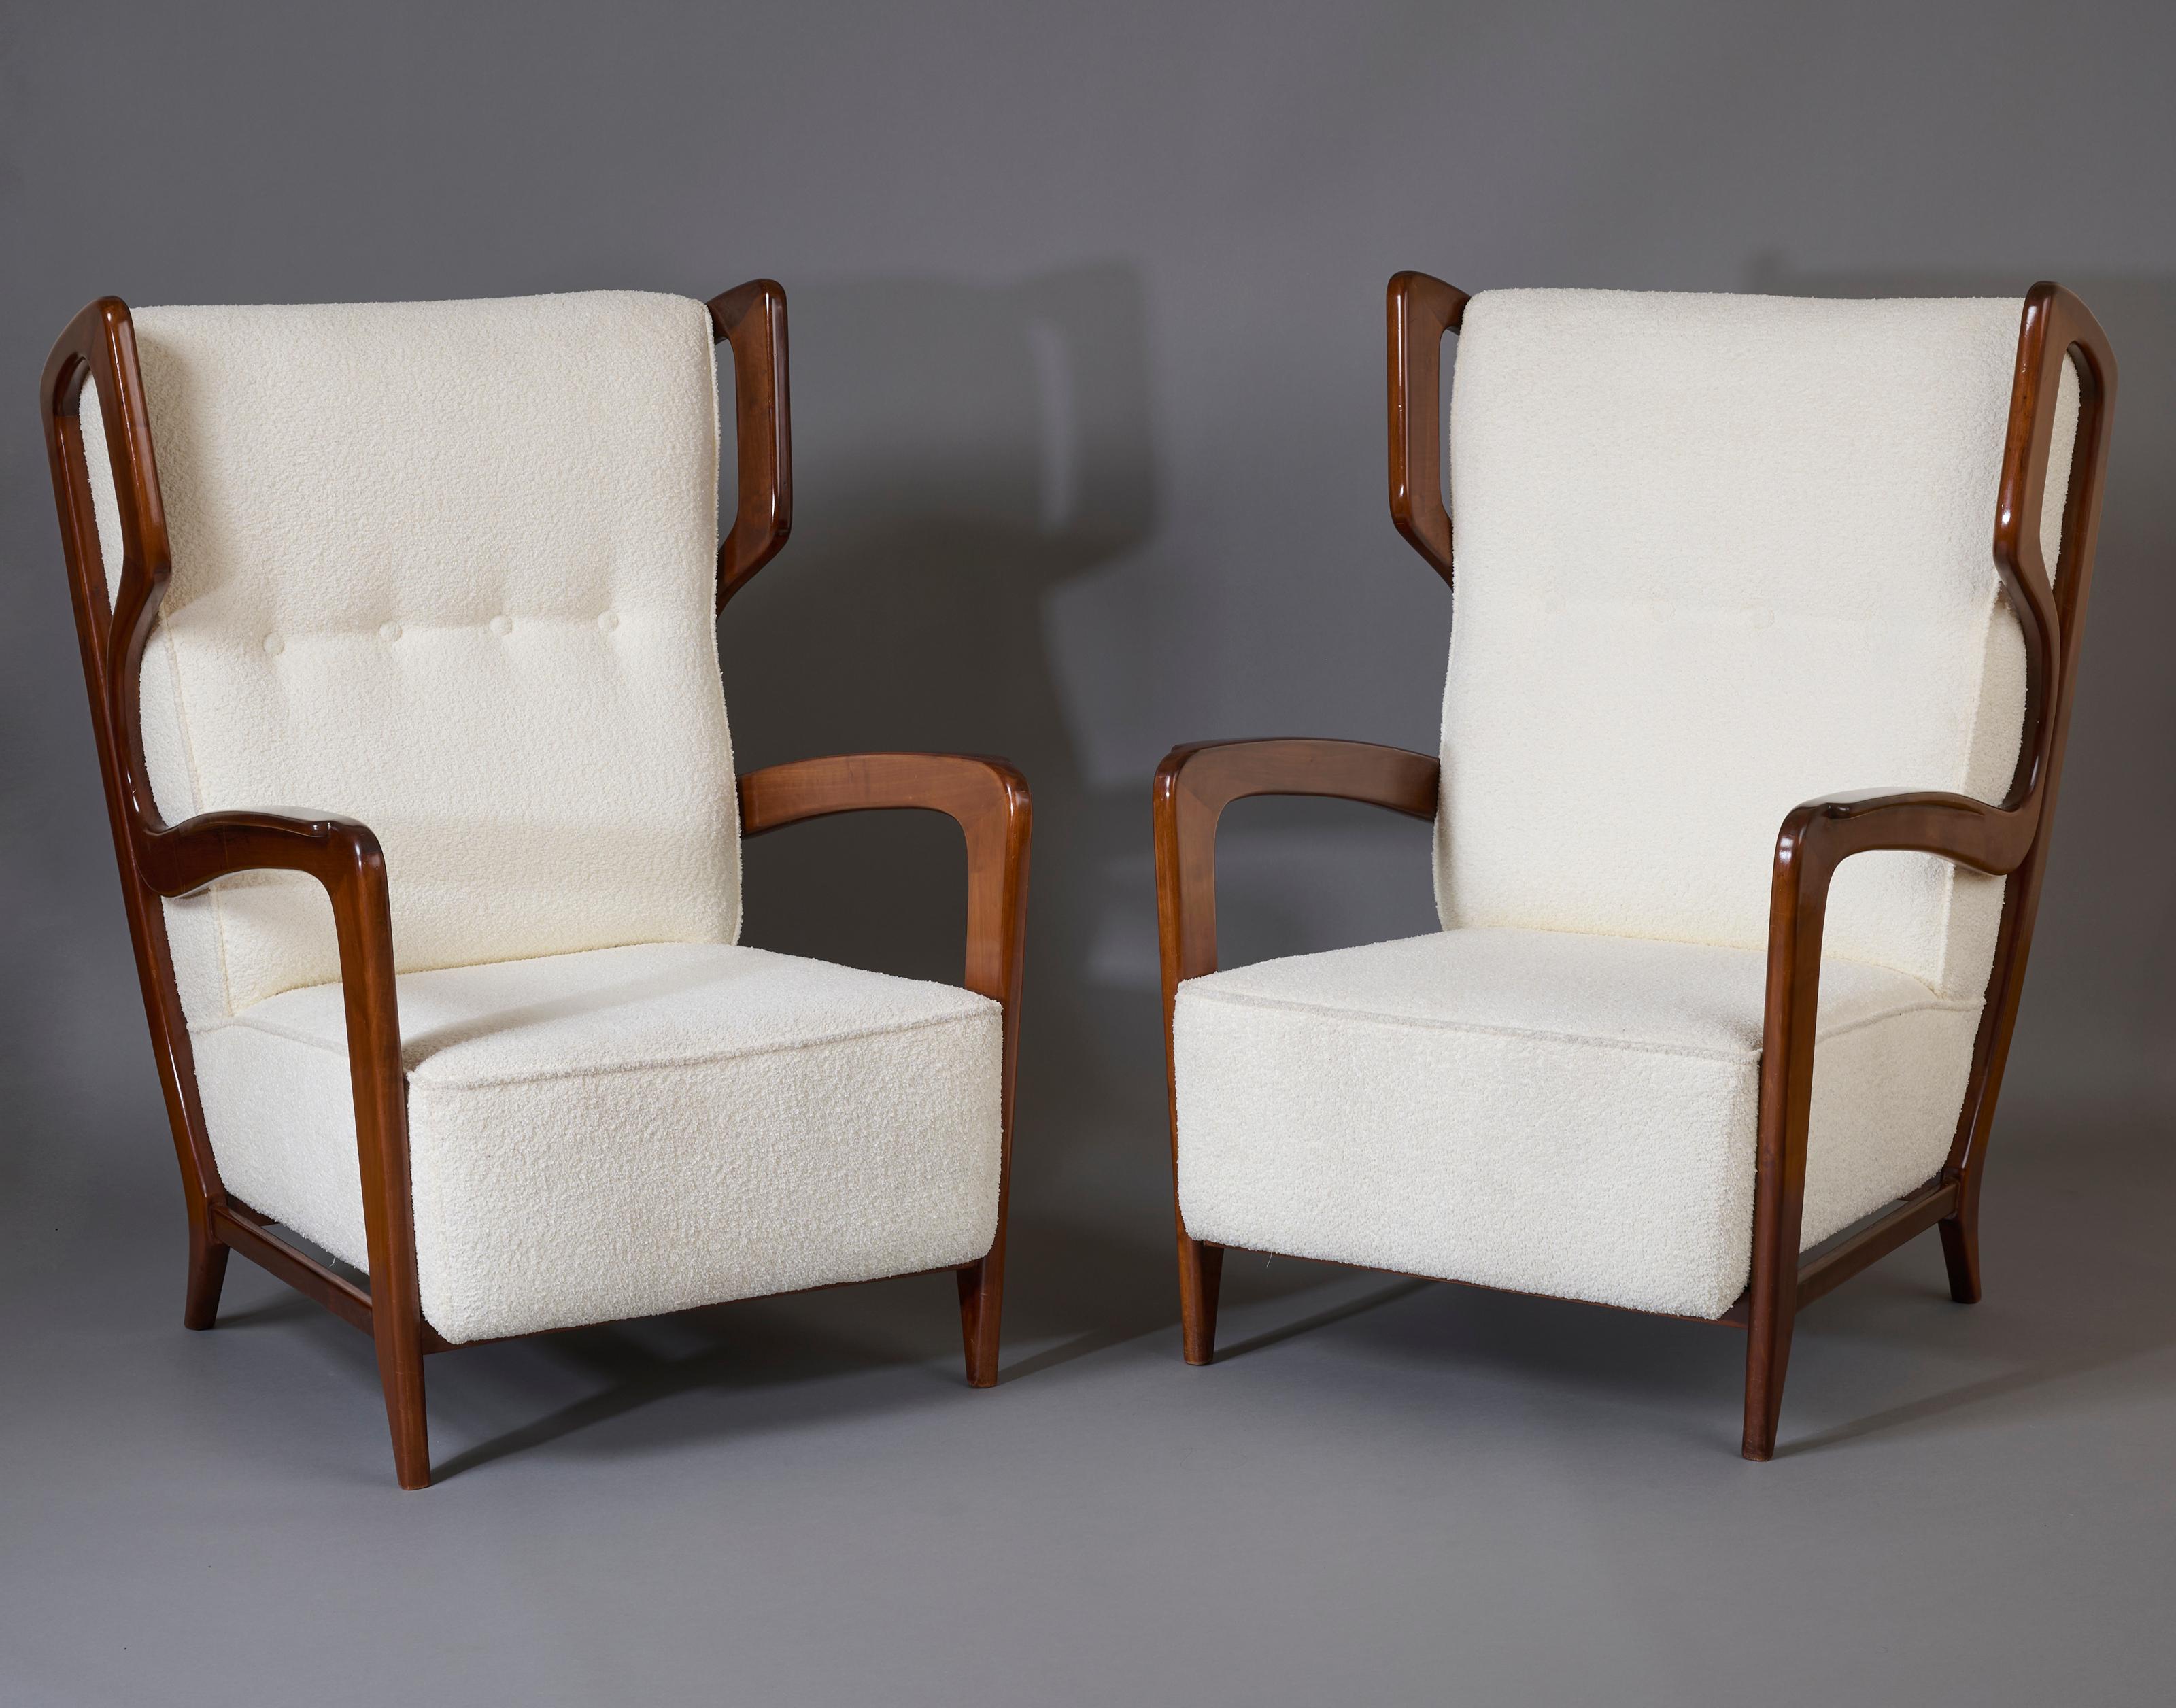 Mid-Century Modern Gio Ponti, Exceptional Pair of Rare Wingback Armchairs in Walnut, Italy, 1940s For Sale